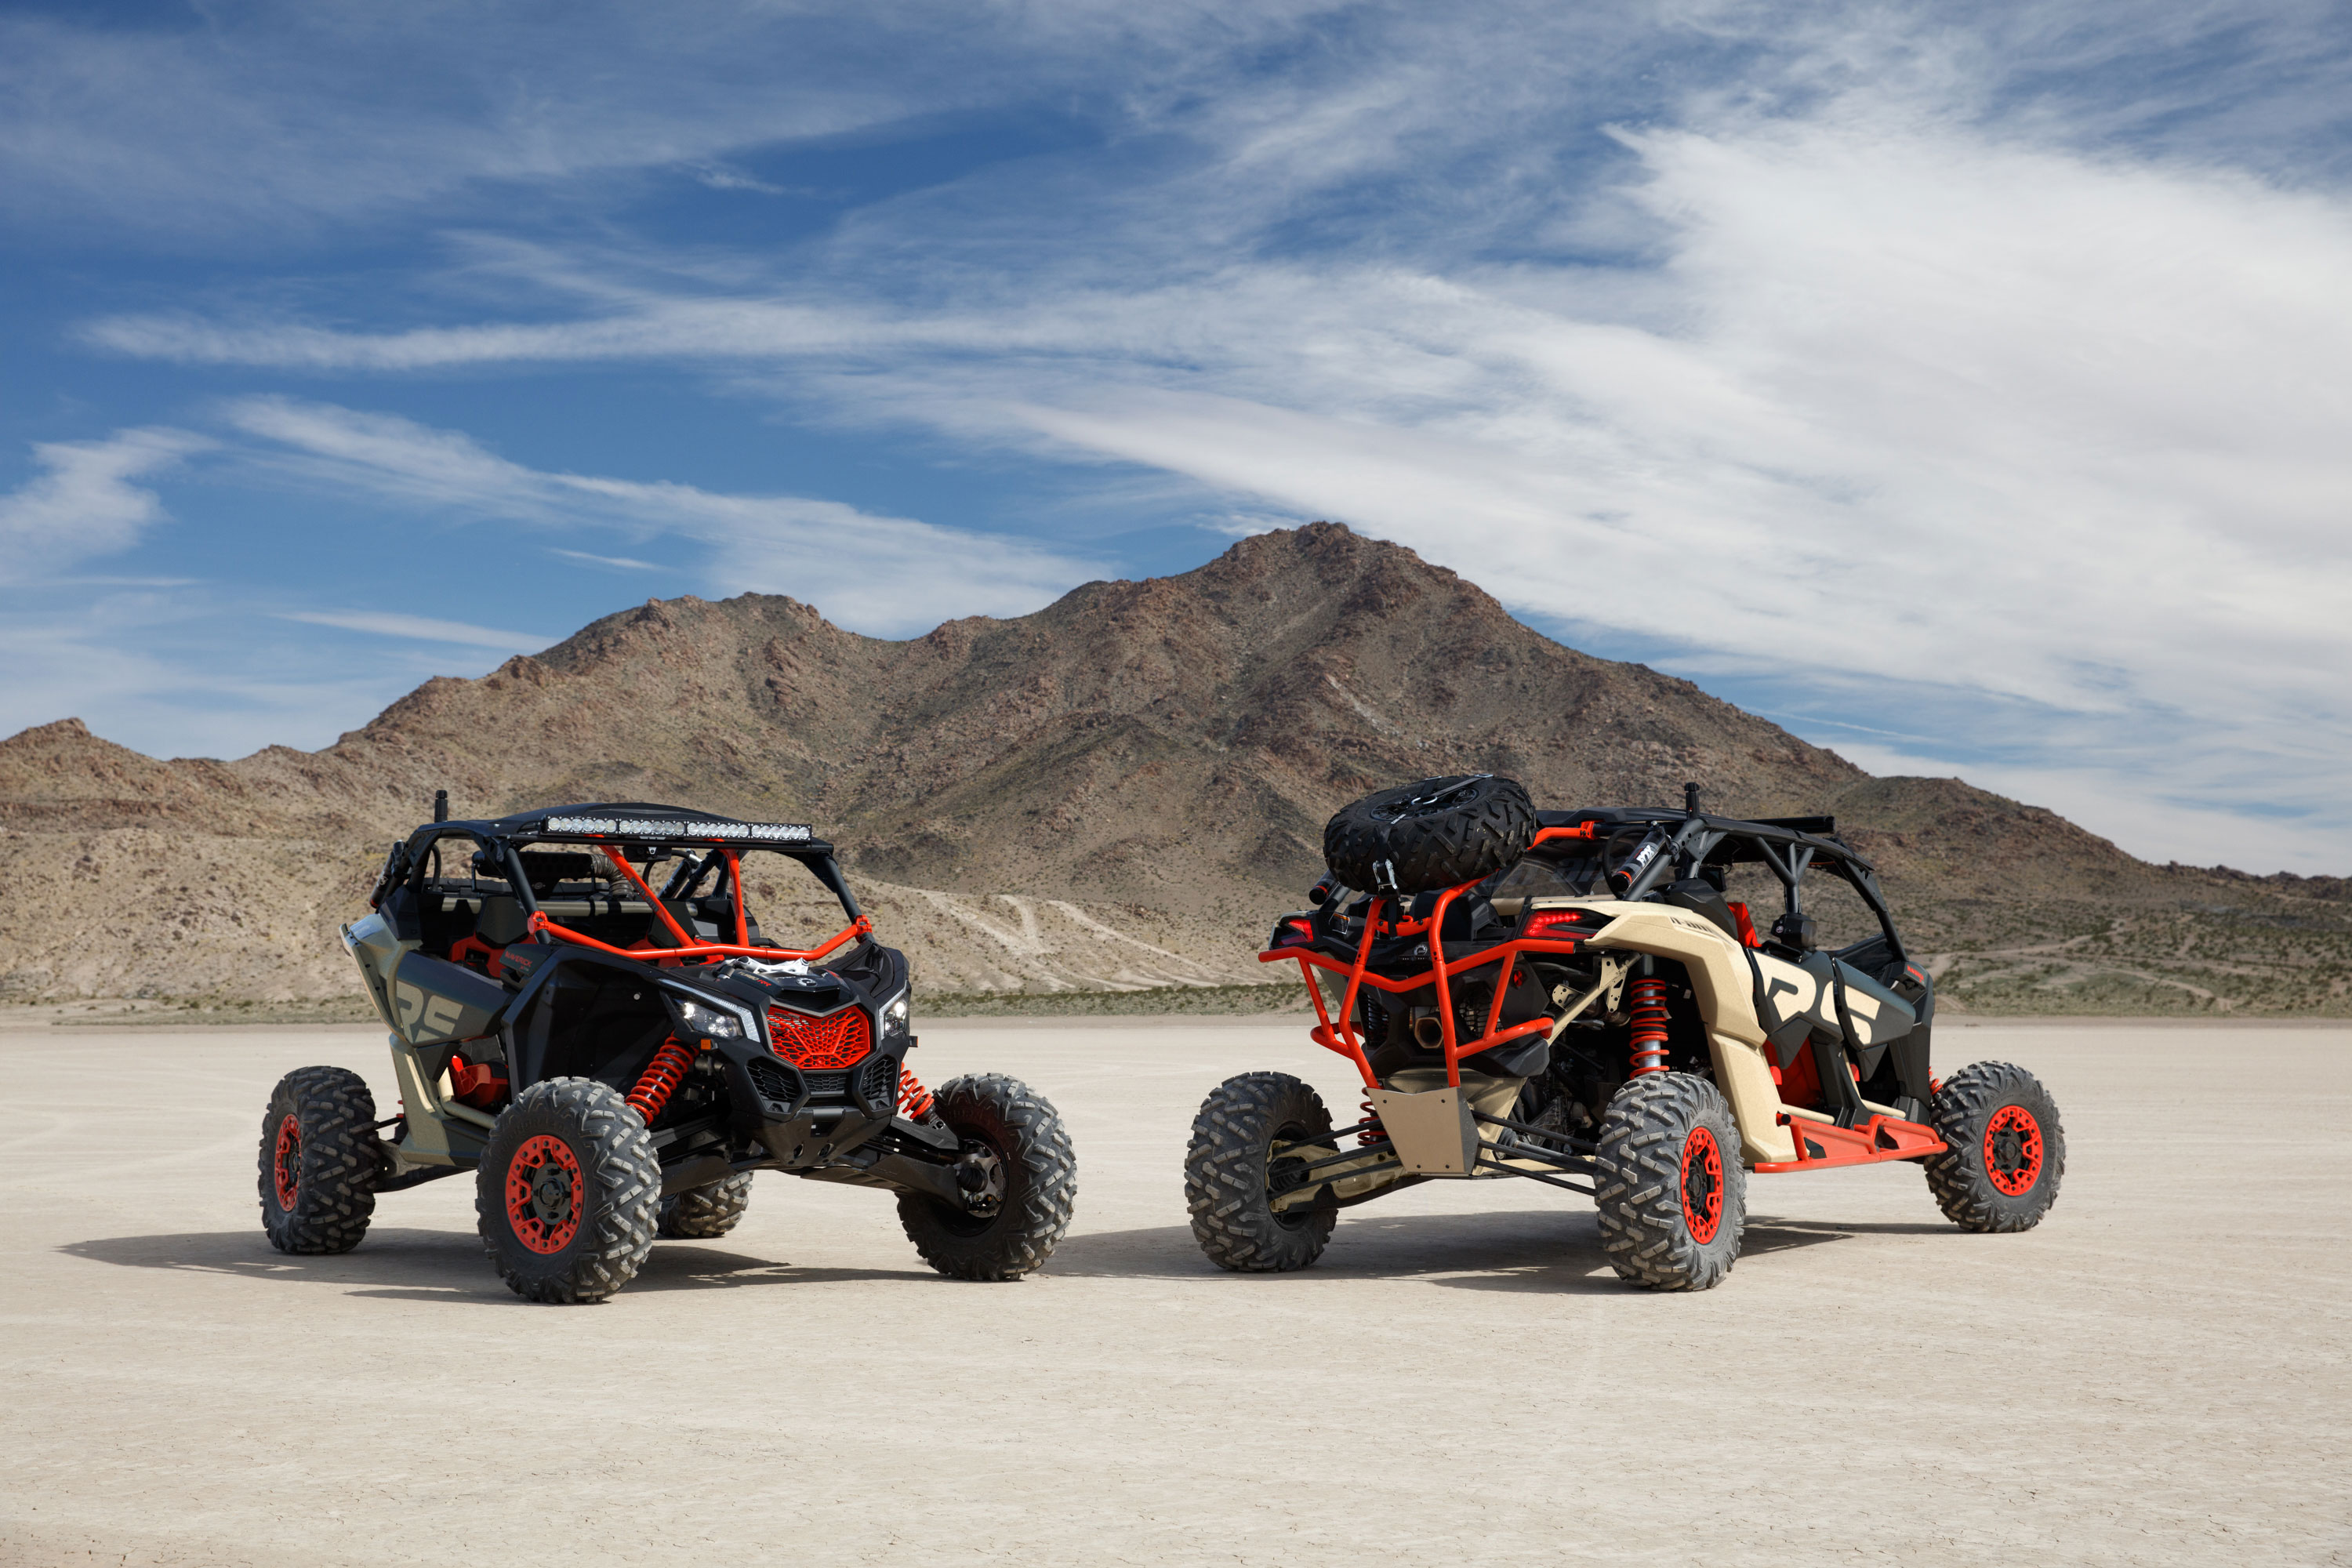 A Can-Am Maverick side-by-side going full speed in the desert